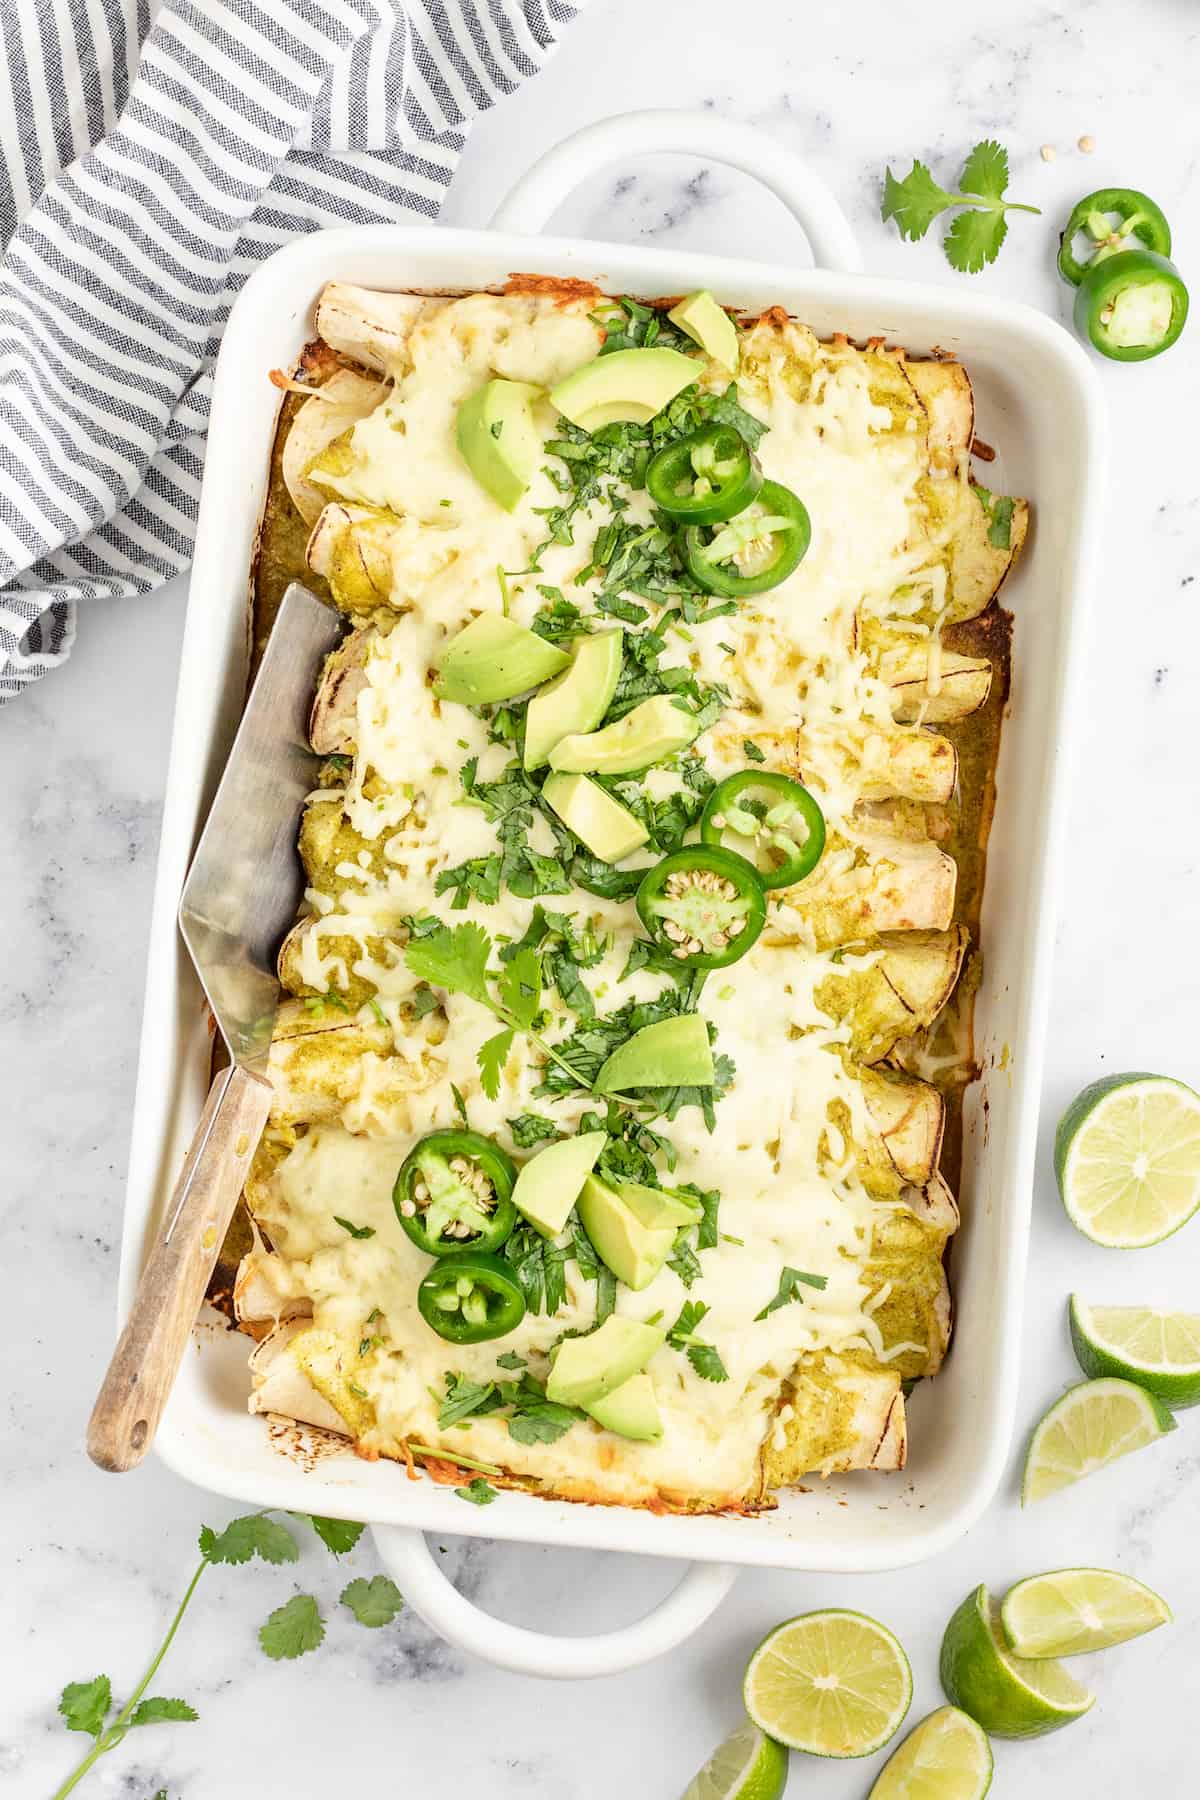 casserole dish with creamy chicken enchiladas verdes with limes and jalapenos as garnishes